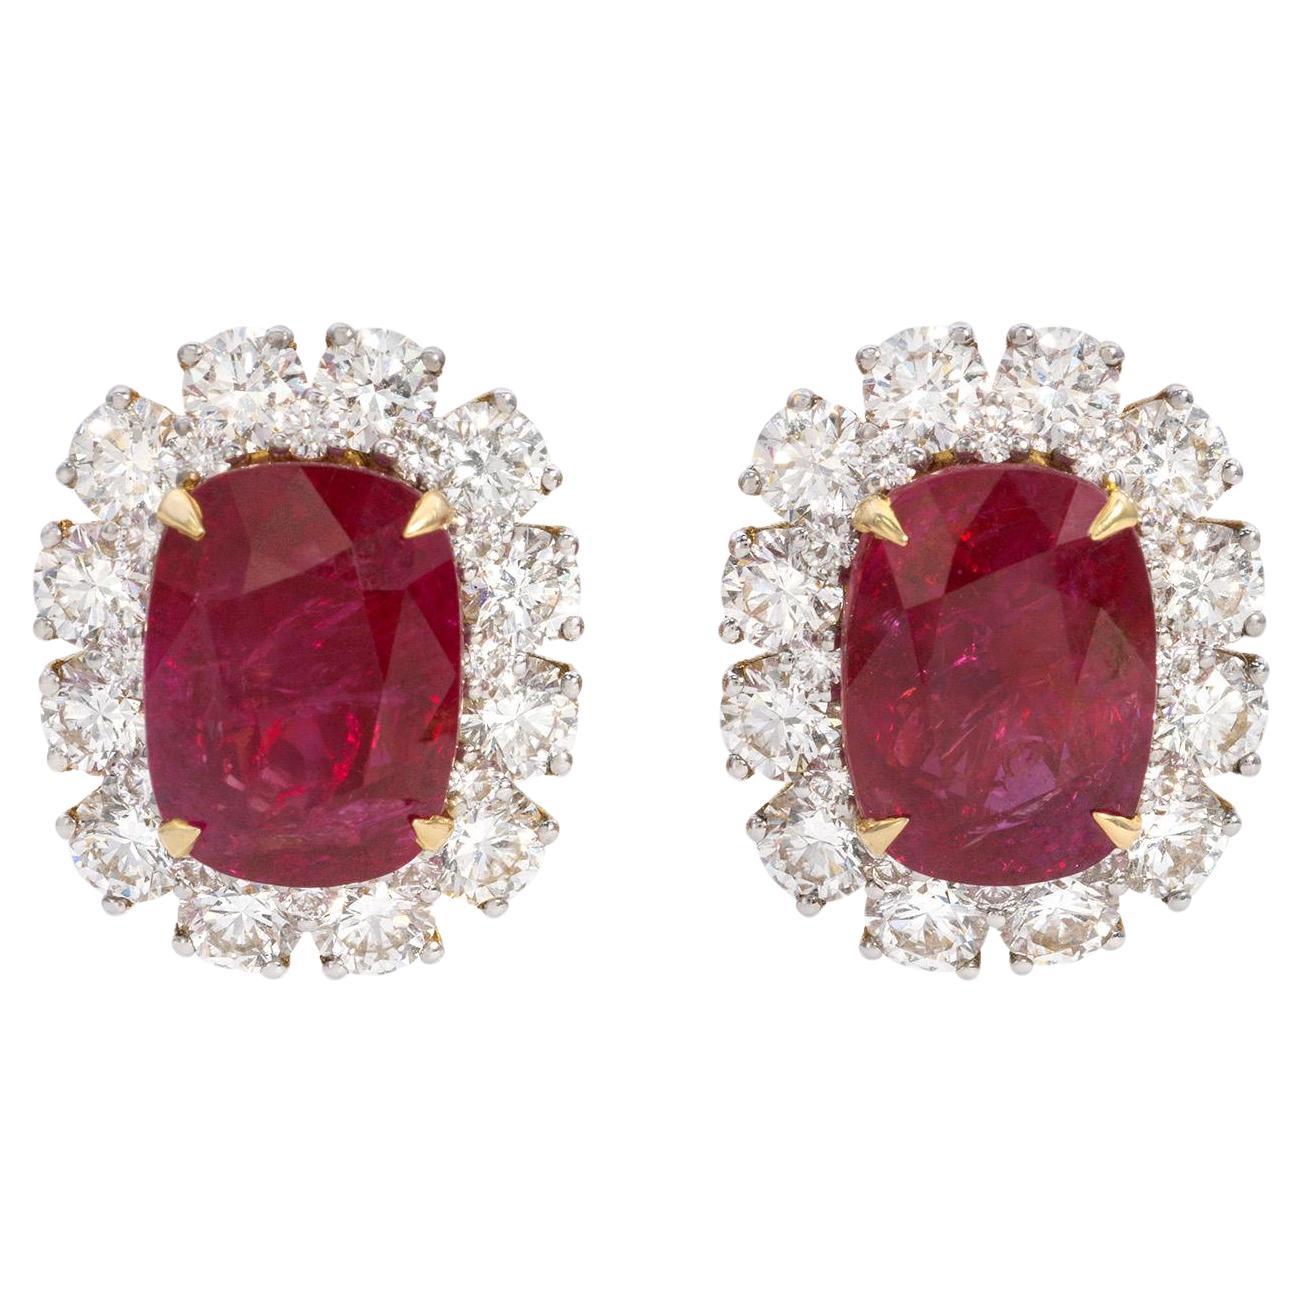 SSEF 11 Carat No Heat Natural Burmese Ruby and Diamond 18K Gold Earrings For Sale